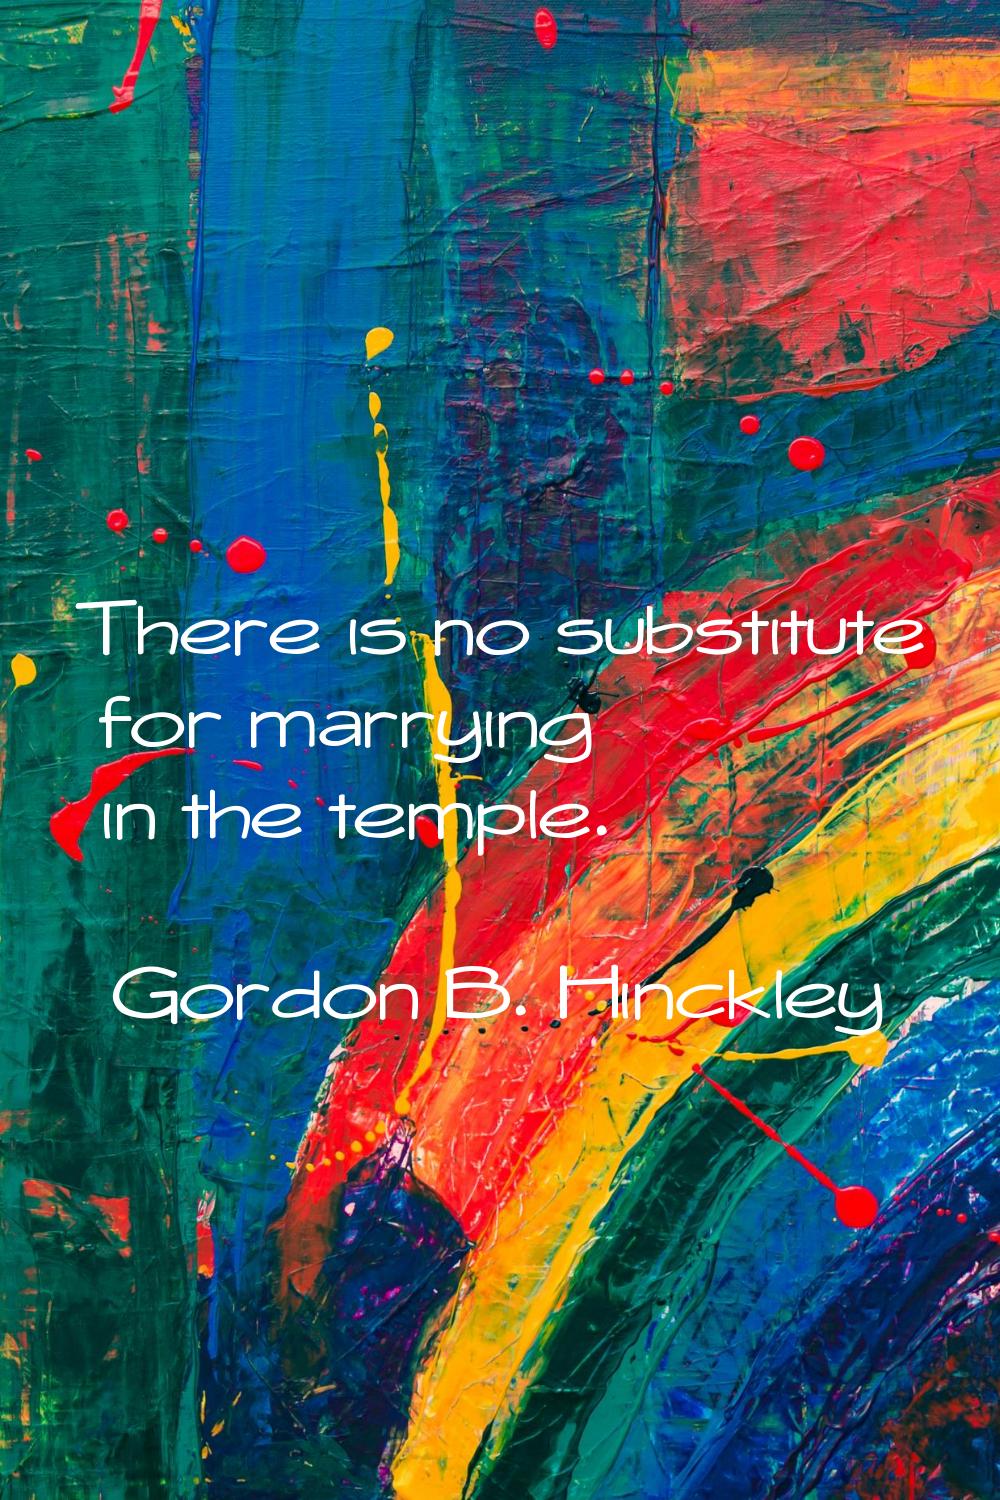 There is no substitute for marrying in the temple.